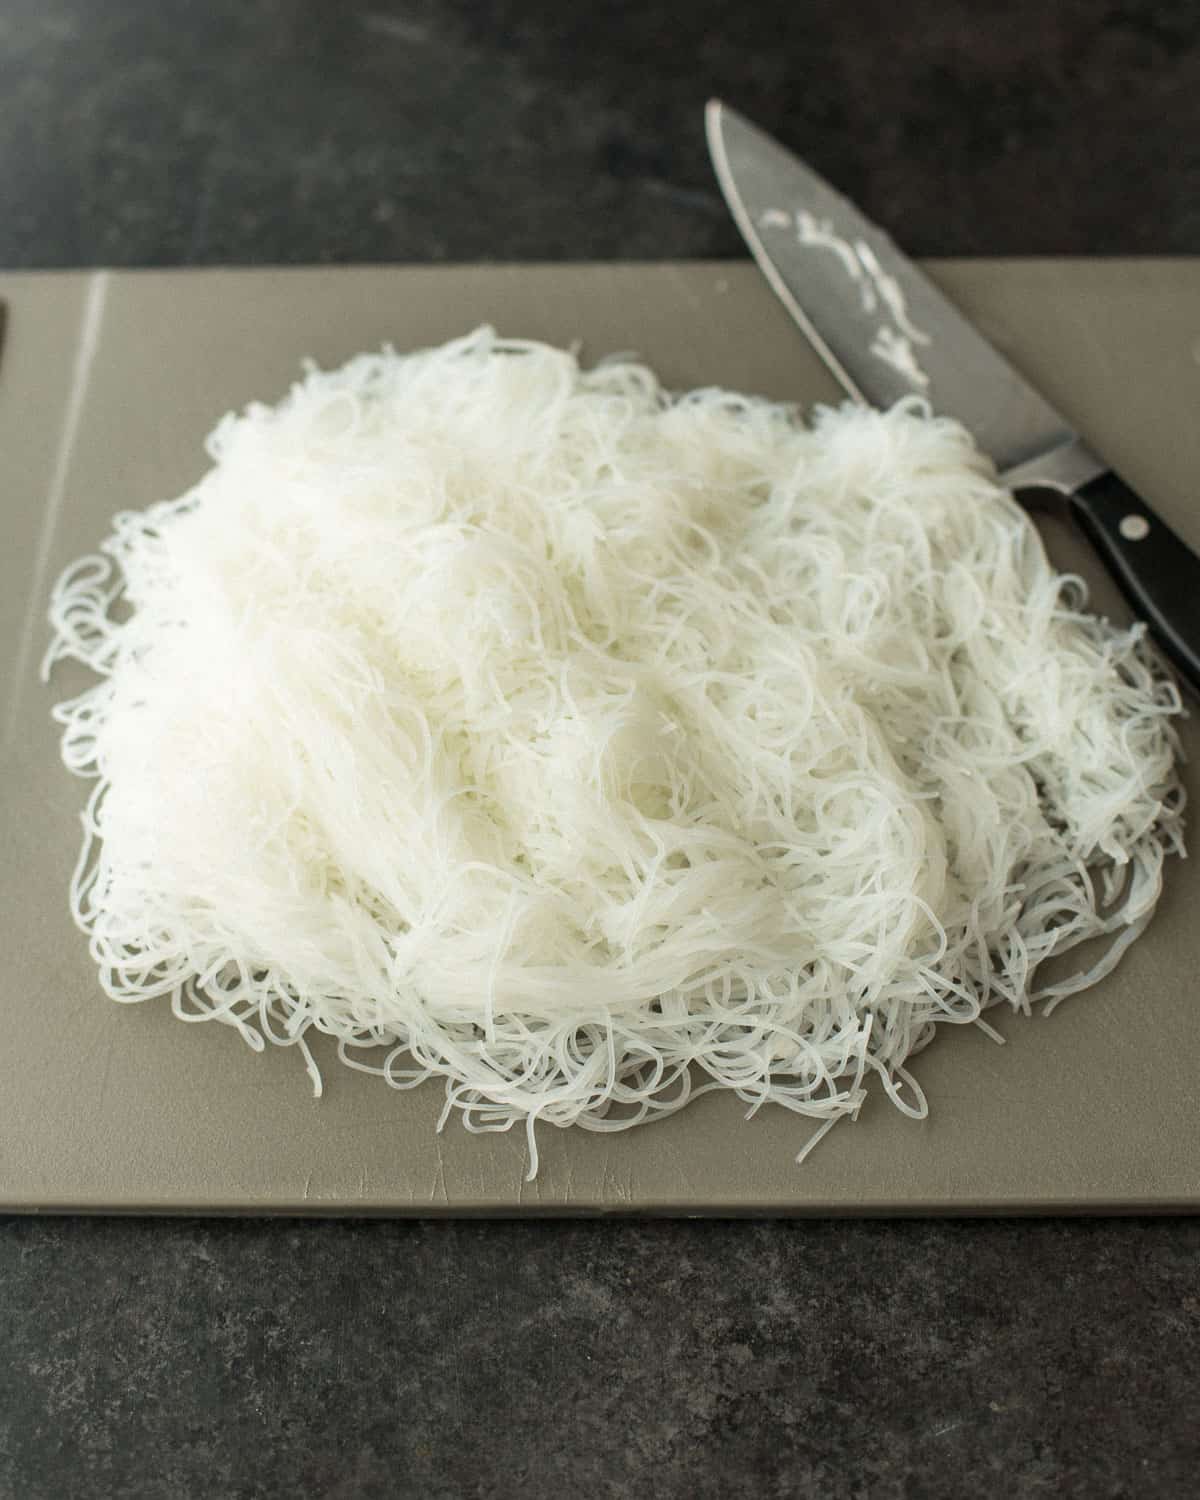 rice noodles and a knife on a cutting board